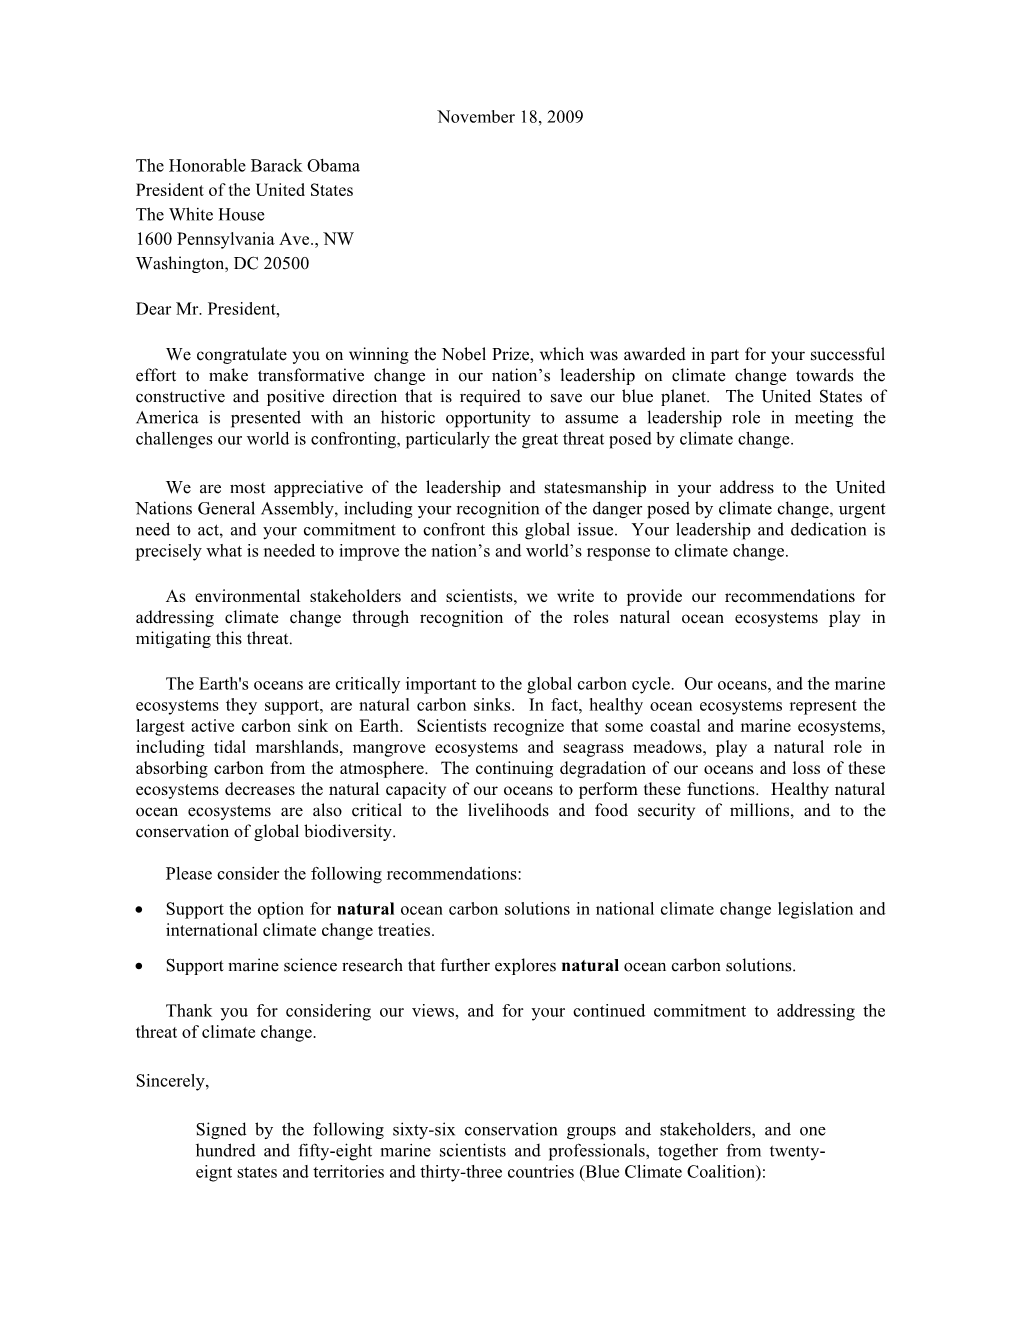 Blue Climate Coalition Letter (Condensed Version)